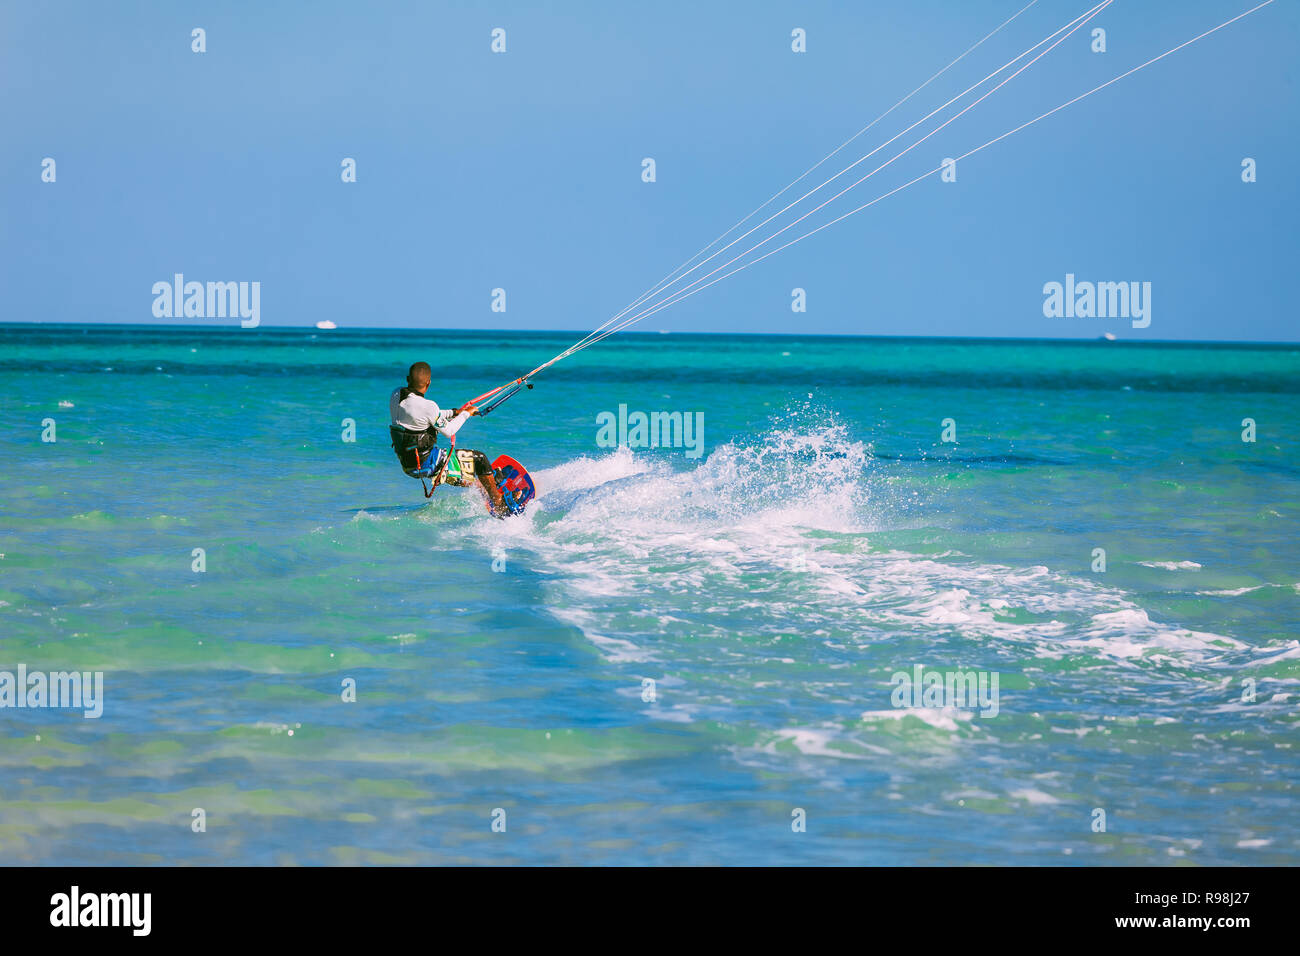 Egypt, Hurghada - 30 November, 2017: The kiteboarder gliding over the Red sea surface. The professional surfer on the board holding the kite straps. T Stock Photo